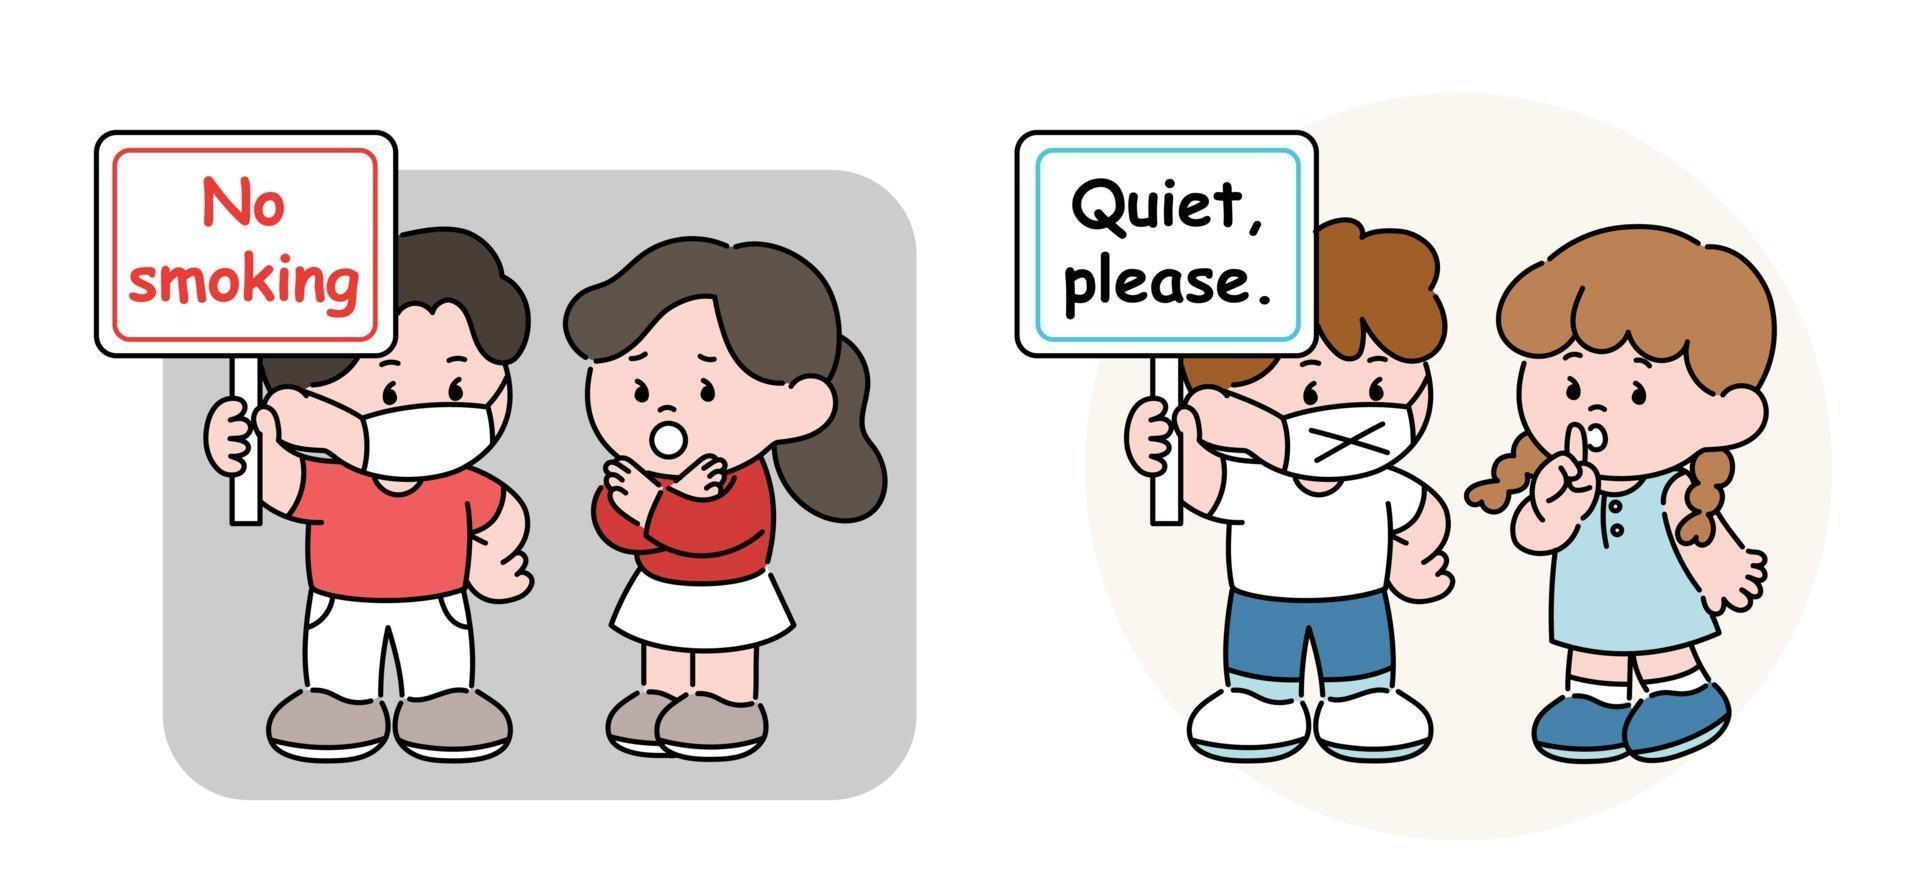 No smoking, please be quiet. Cute couples with message pickets. hand drawn style vector design illustrations.